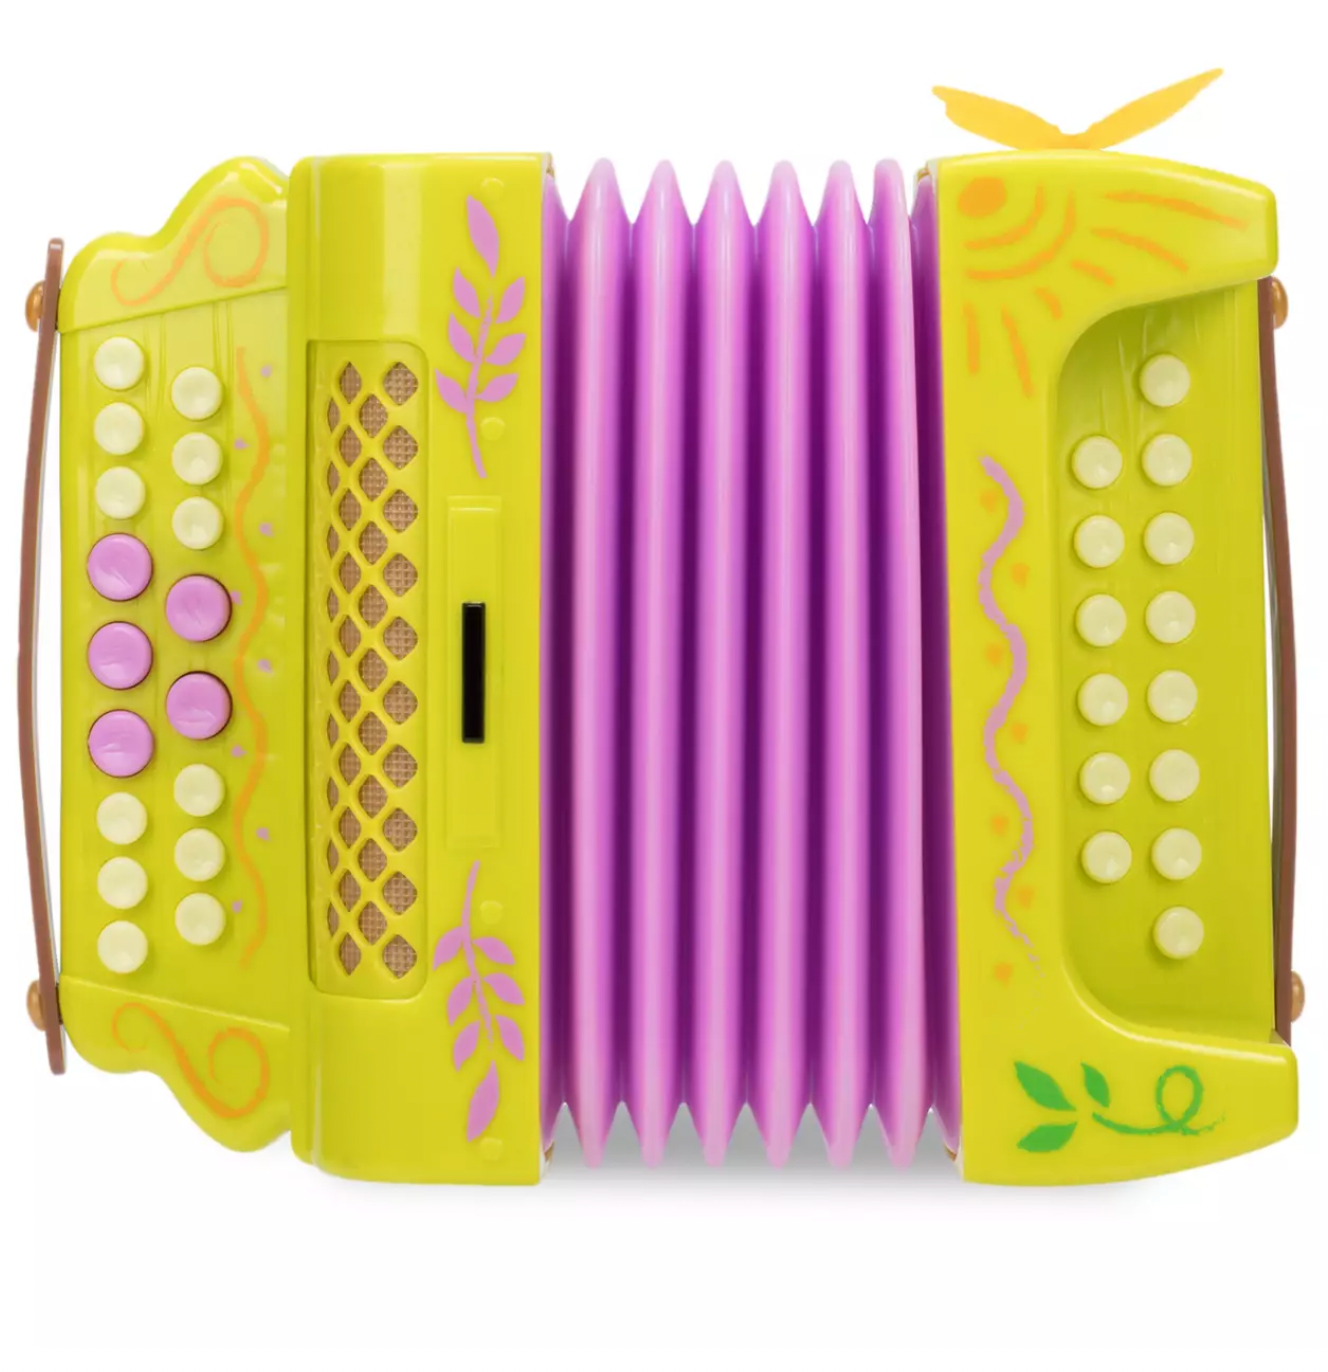 Disney Encanto Mirabel's Musical Accordion Toy New with Box